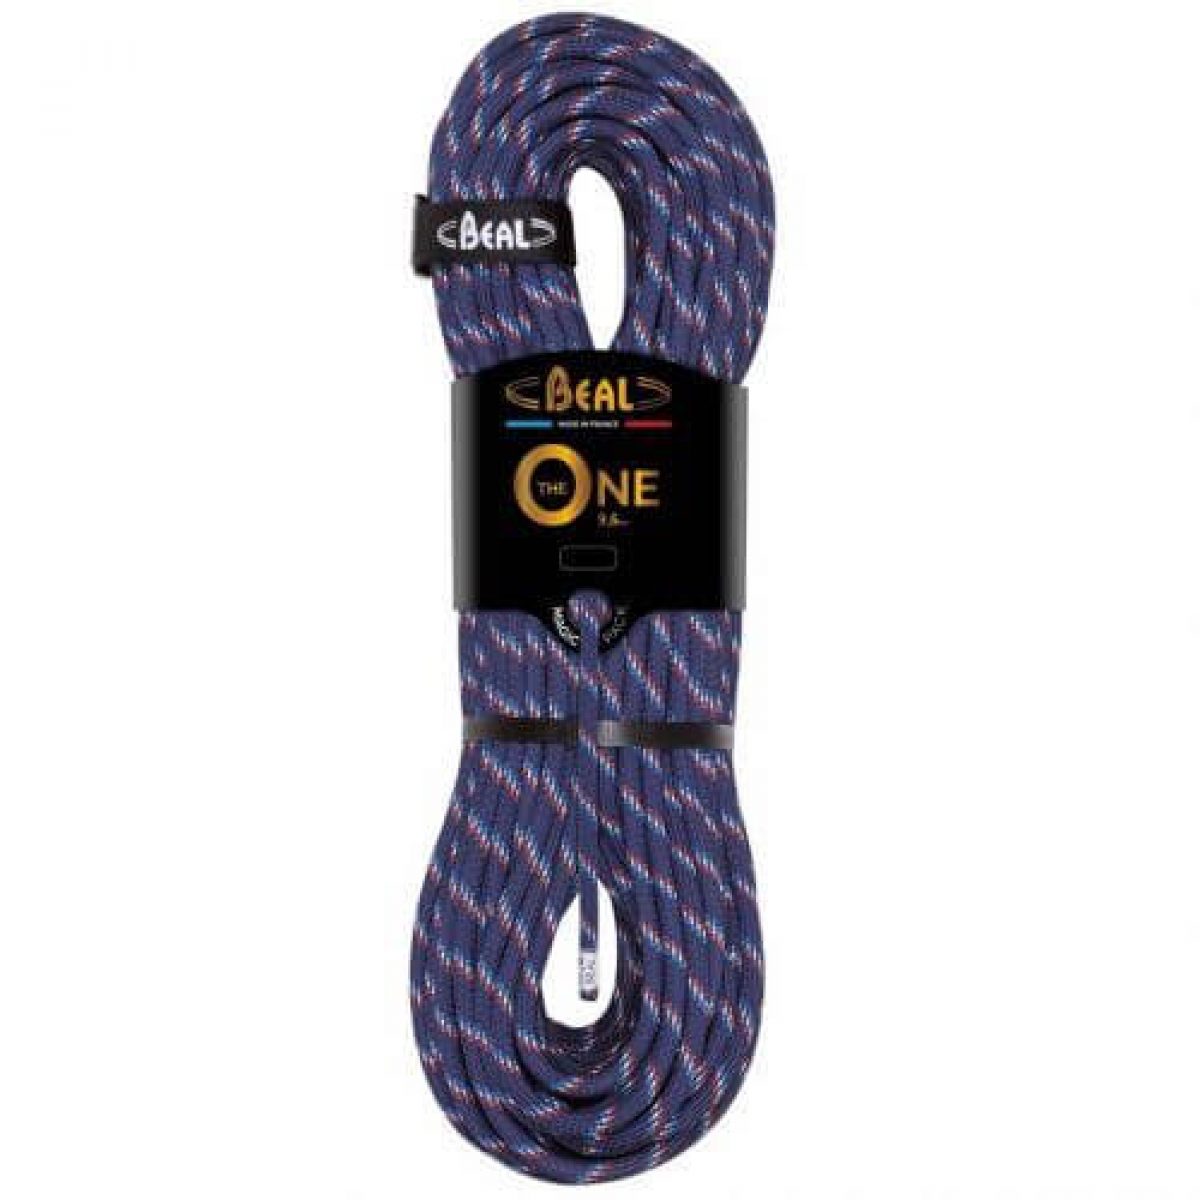 BEAL INDUSTRIE LOW STRETCH 10.5MM ROPE BEAL INDUSTRIE LOW STRETCH